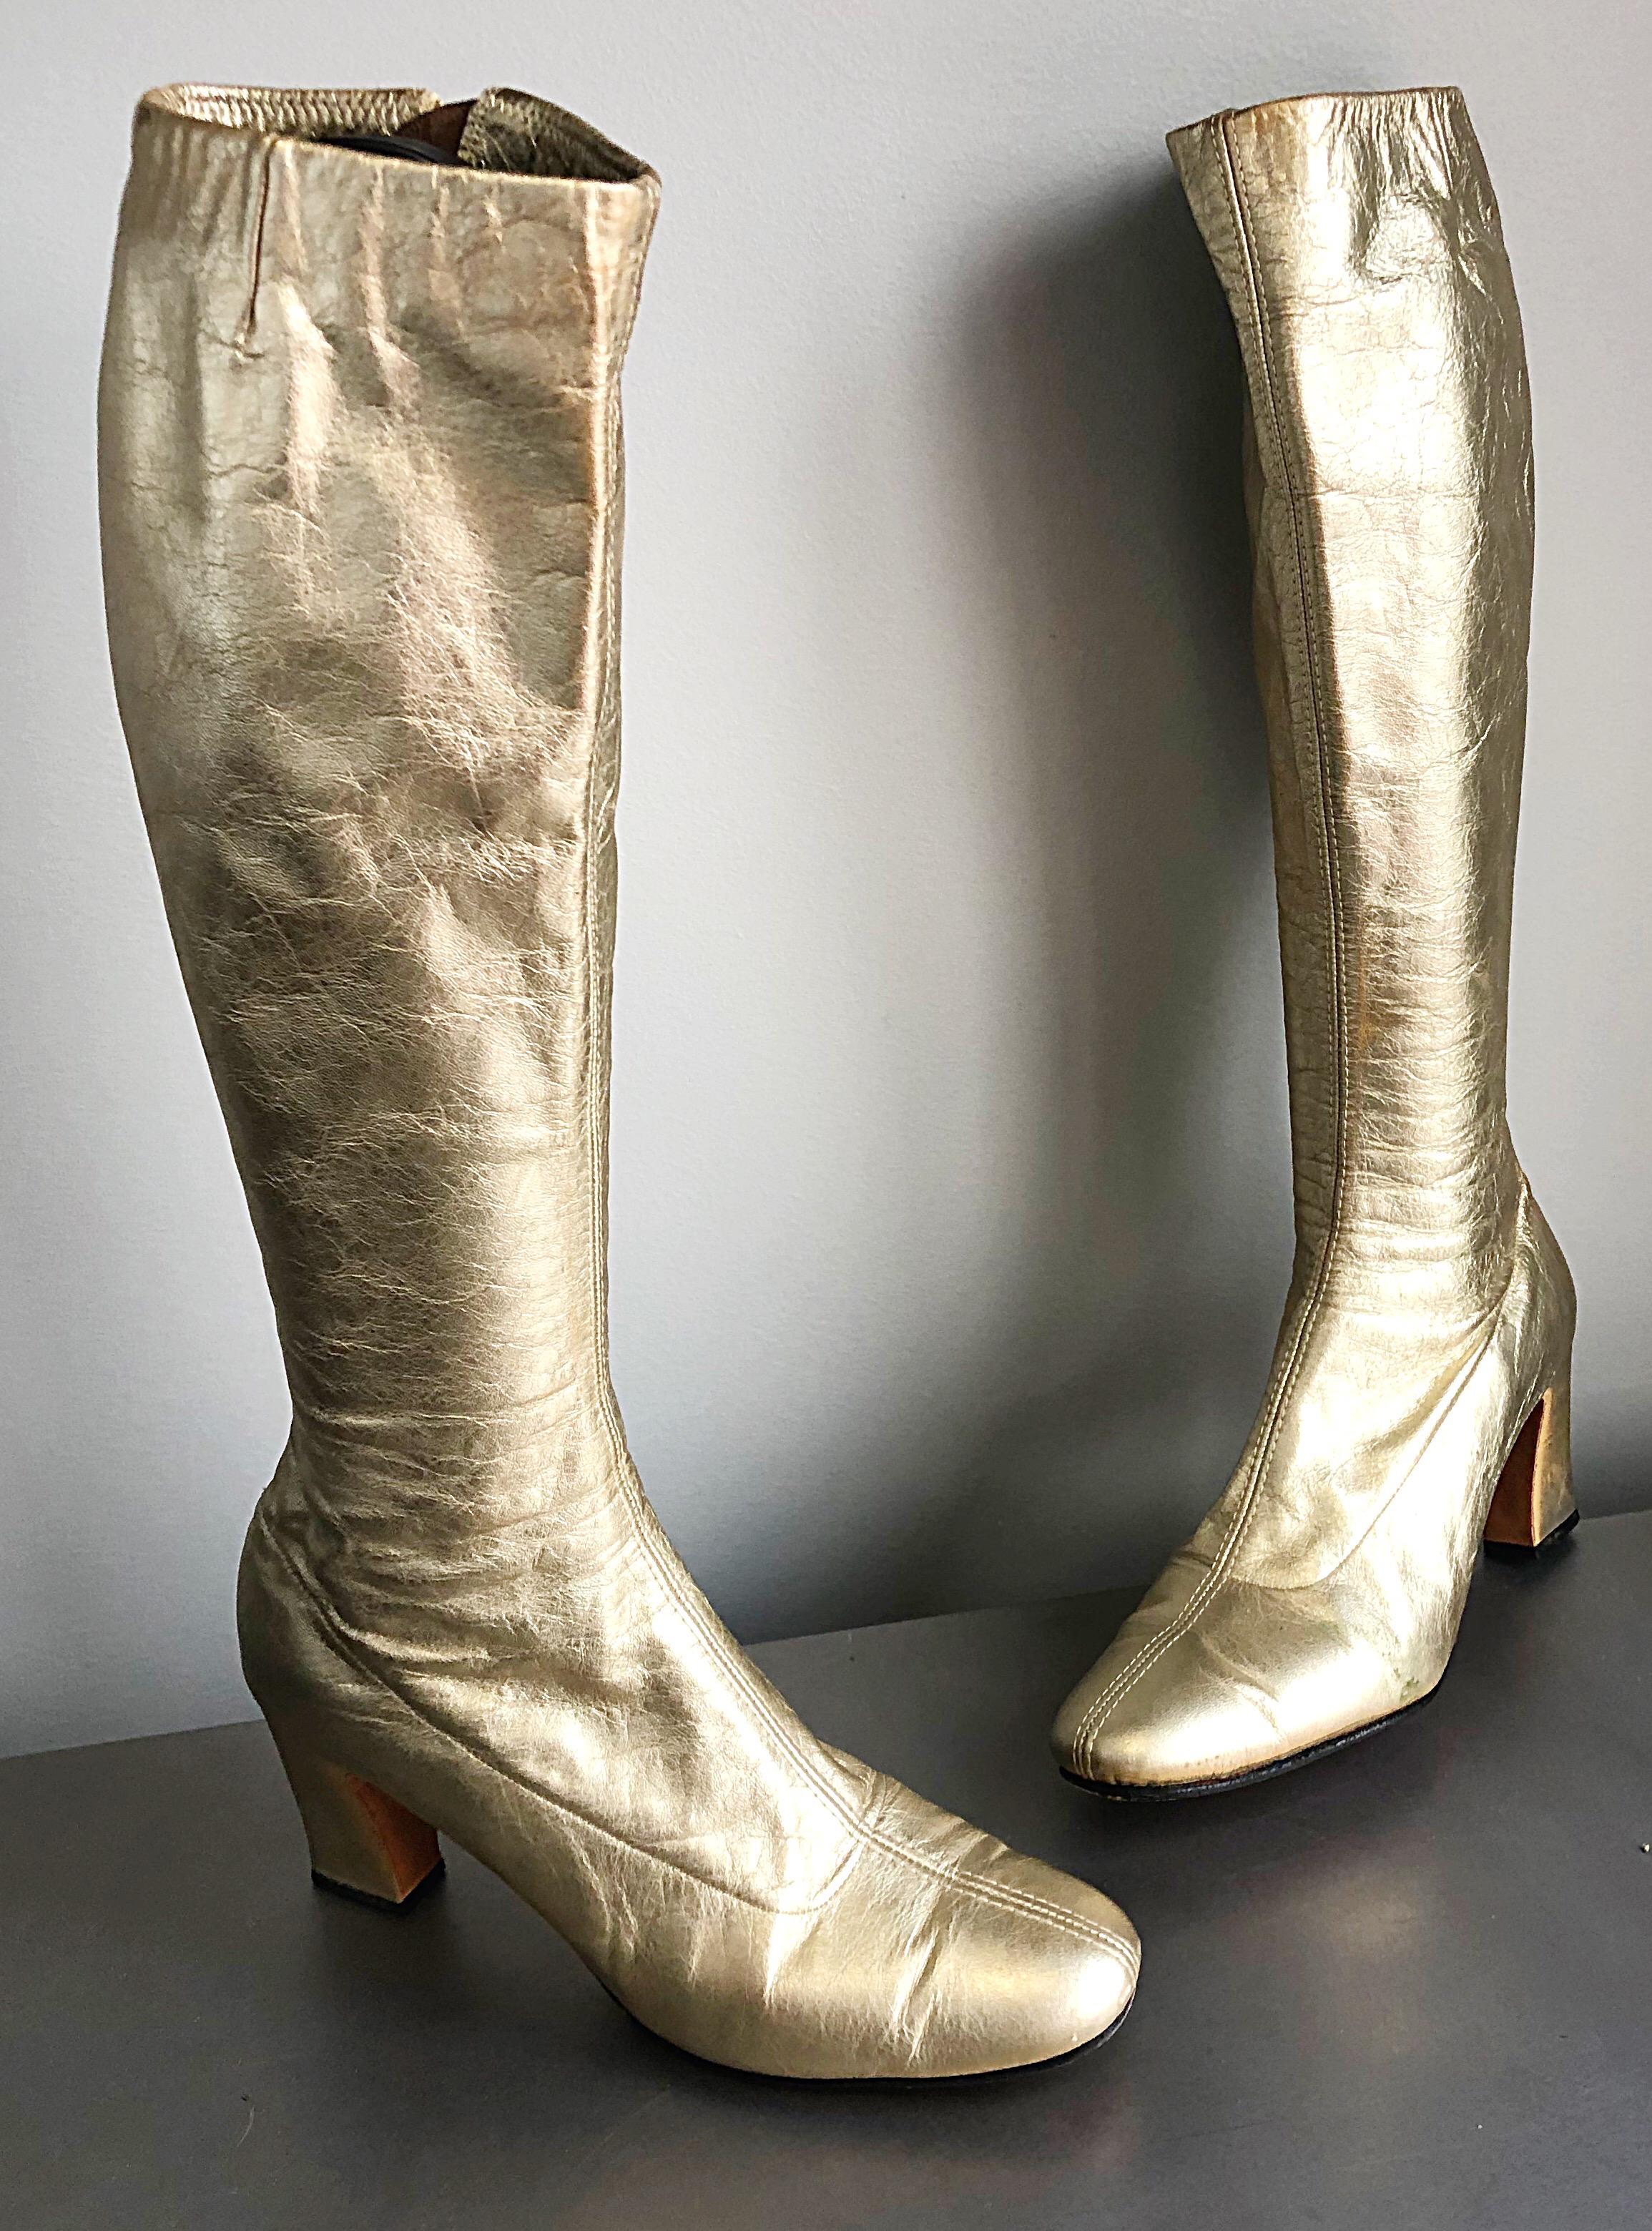 Amazing mid - late 60s gold leather go-go boots ! Features matte gold metallic. Leather sole. Zipper up the inner leg. Can easily be dressed up or down. Great with a skirt, dress, shorts, or tucked into skinny jeans. A lovely authentic pair of gogo